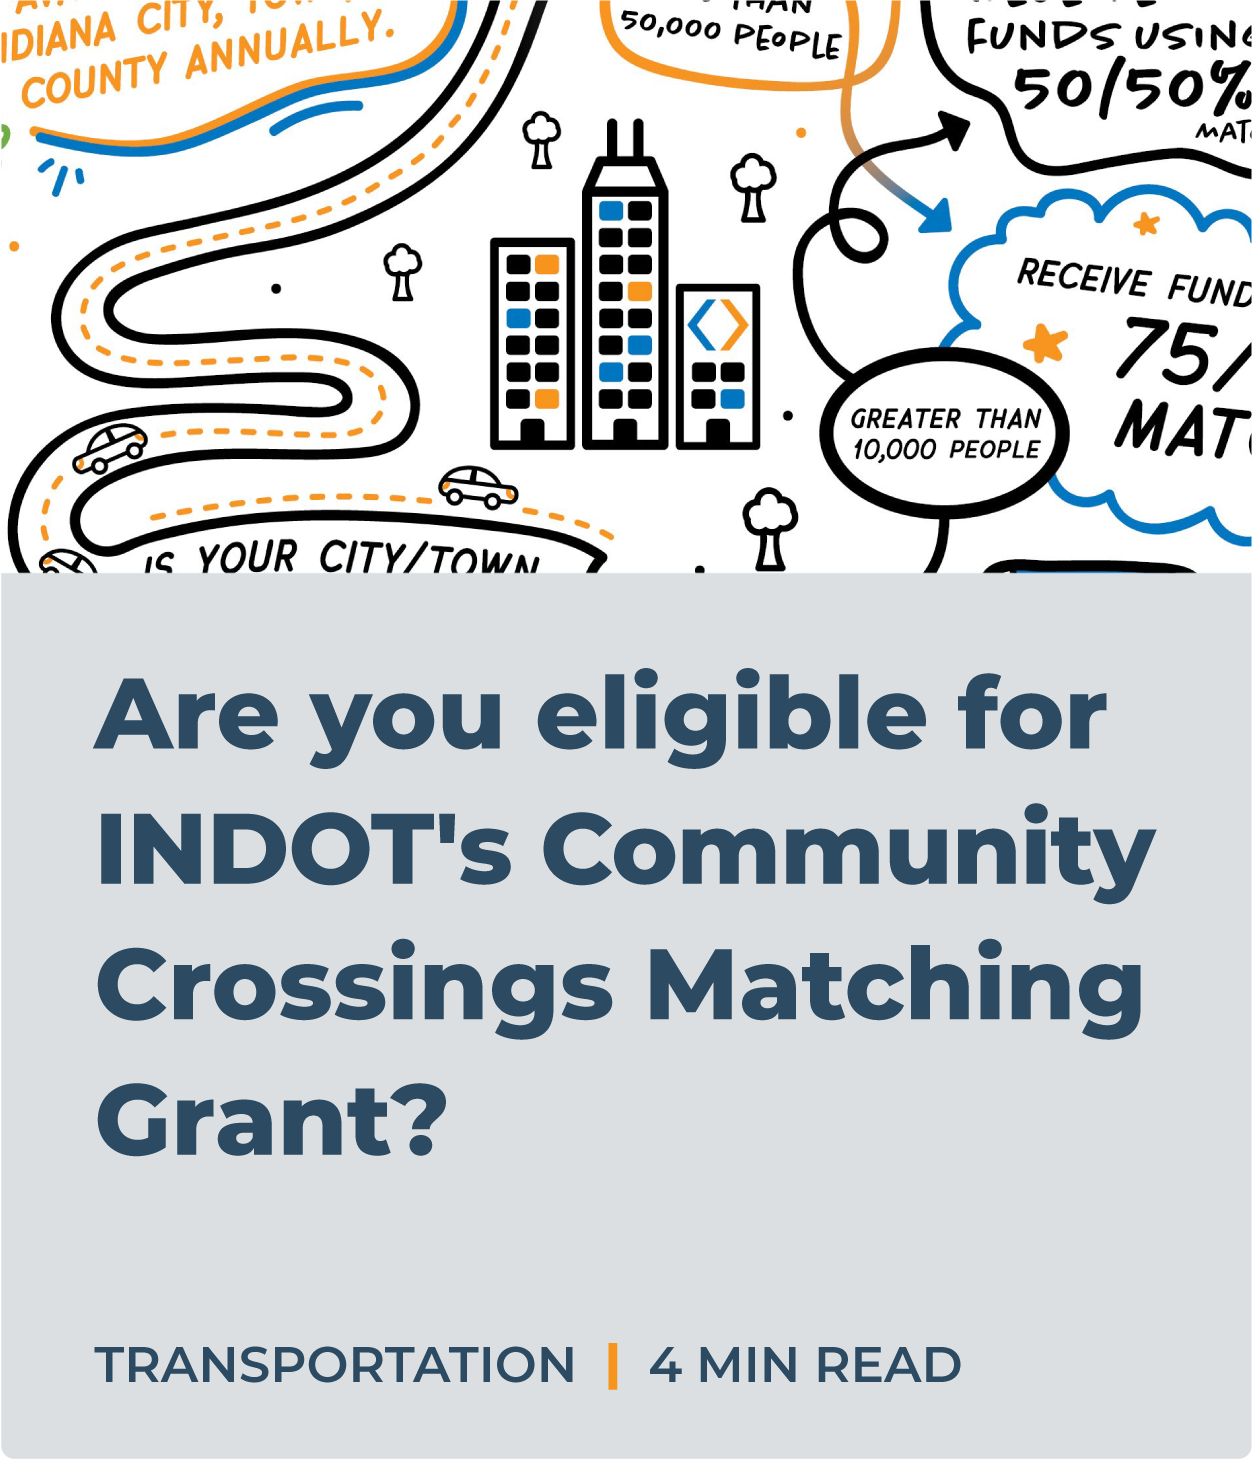 Are you eligible for INDOT's Community Crossings Matching Grant?